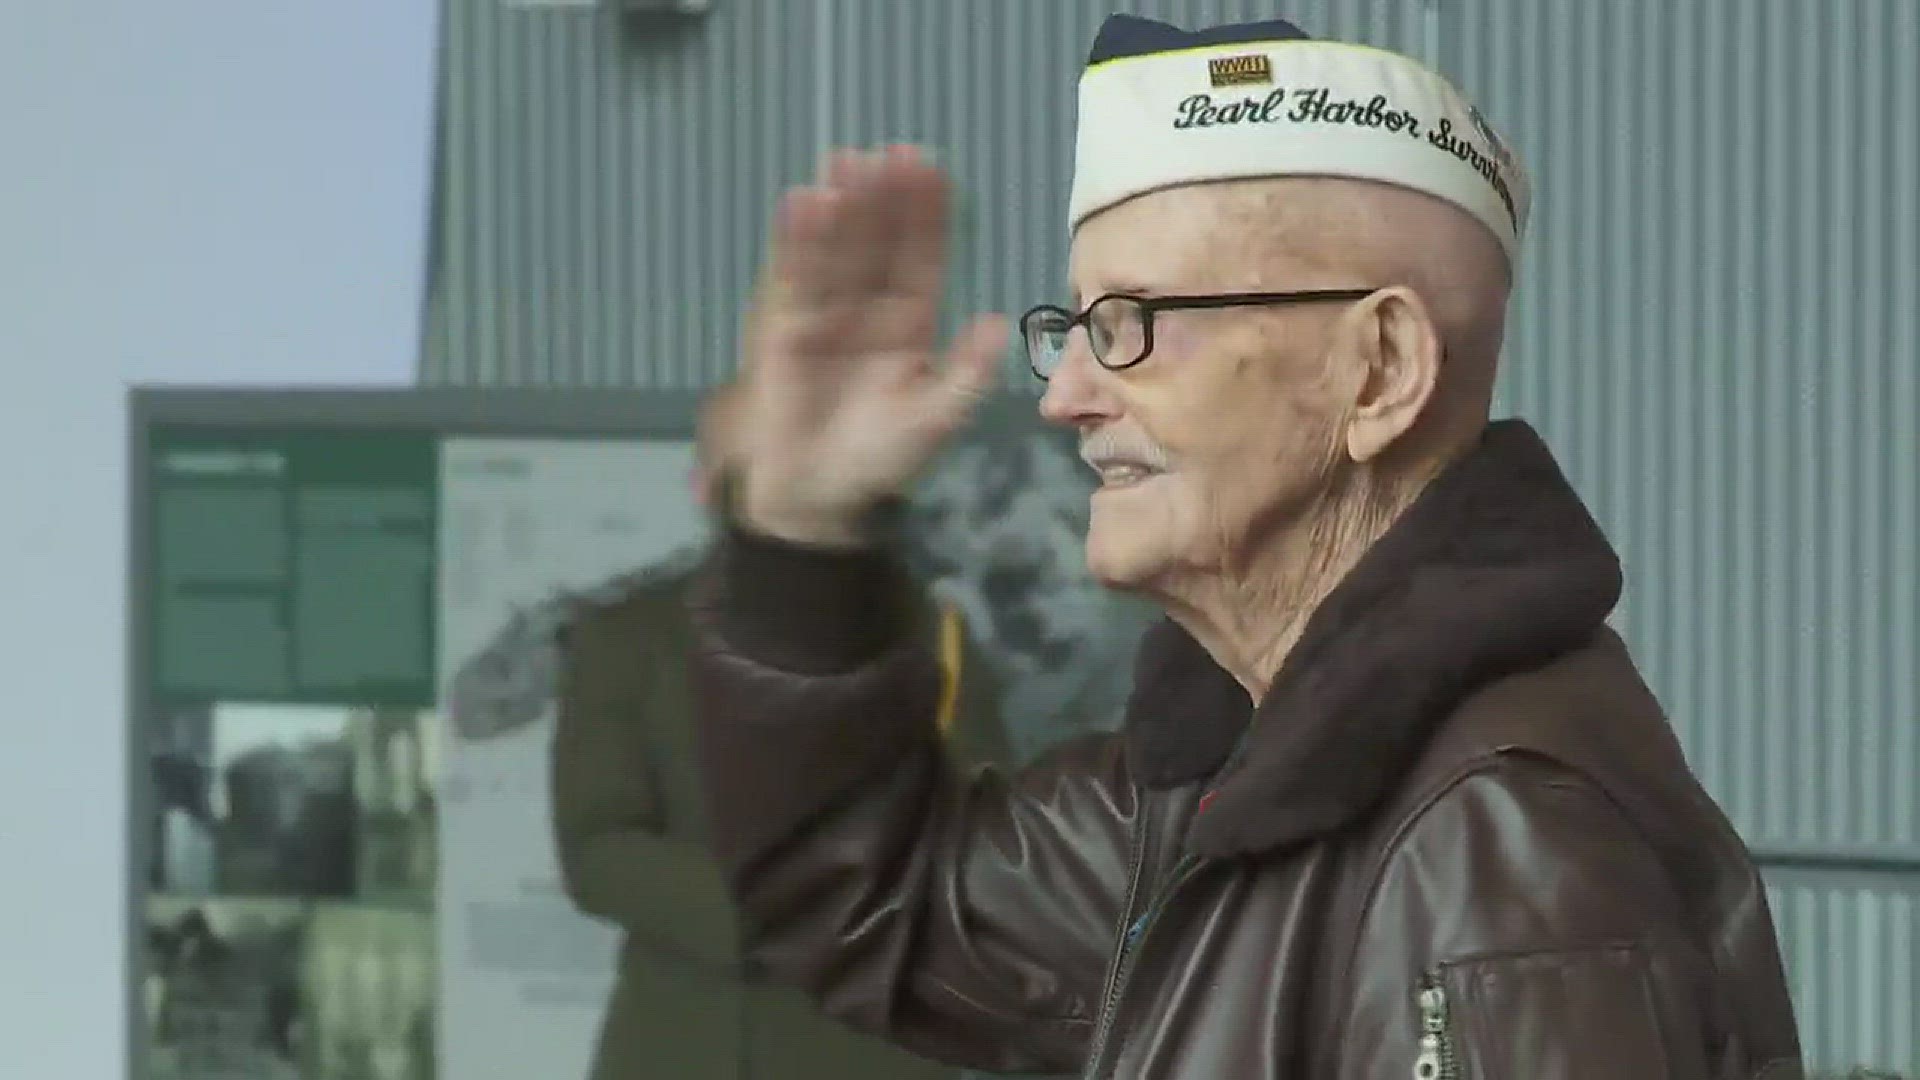 Bill capo talks to Pearl Harbor survivors about their experience 75 years later.